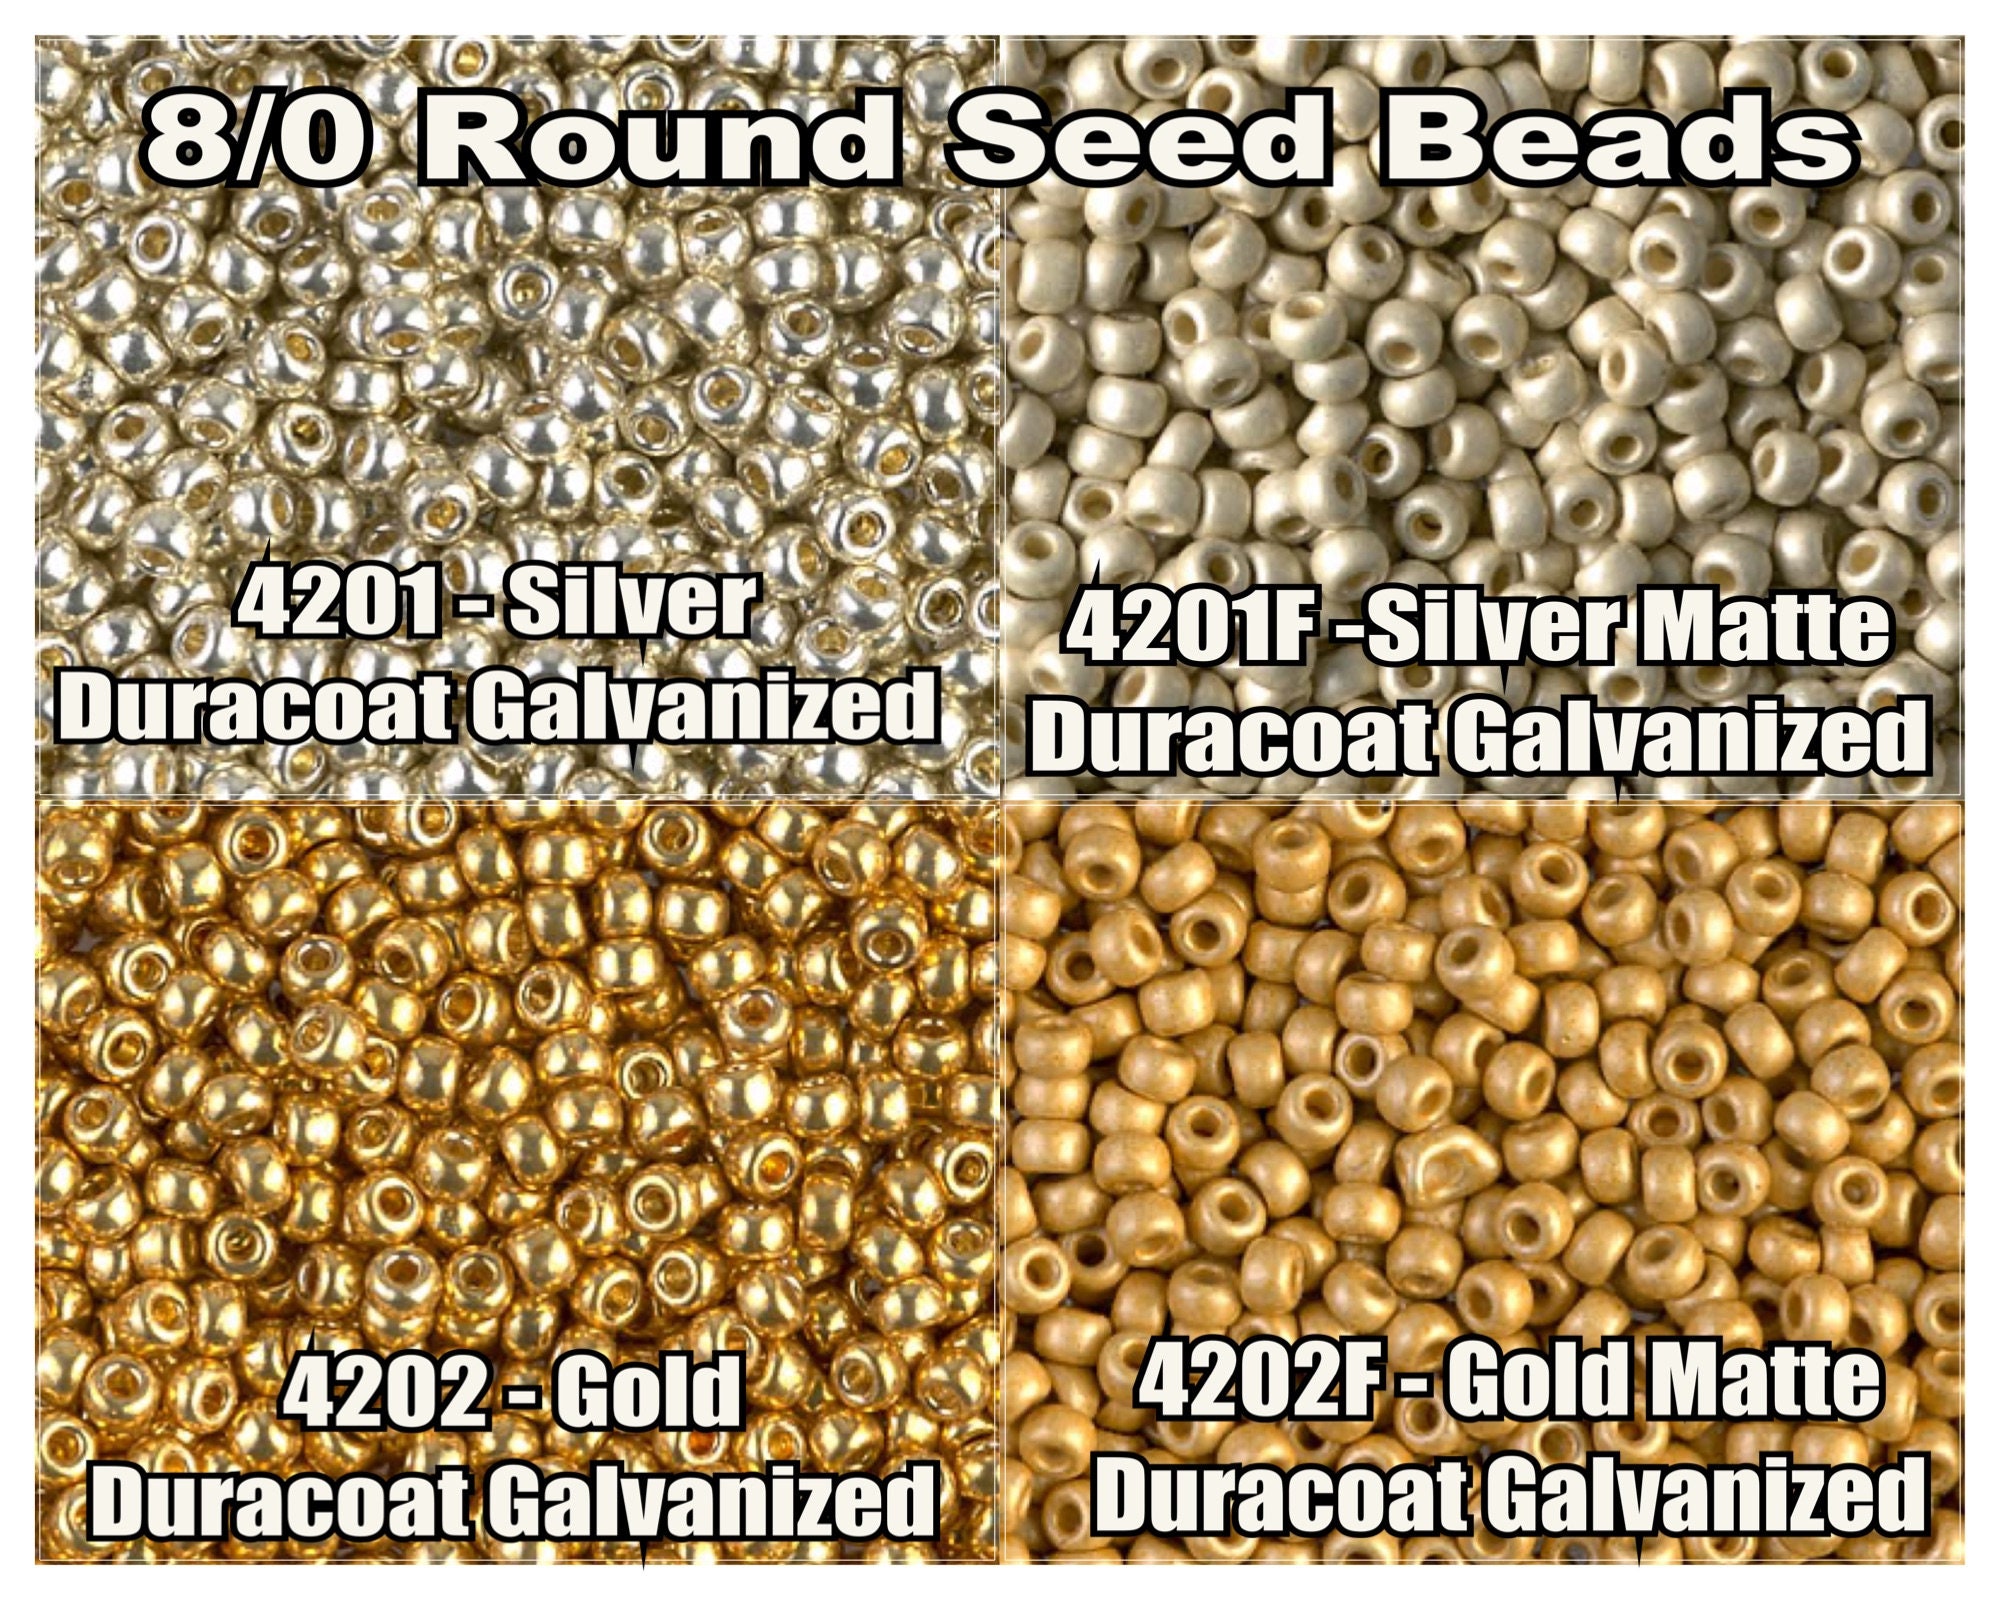 Glass Seed Round Beads Size 8/0, Gold Coloured Seed Beads, Tiny Beads,  Embroidery Jewelry Supplies, 3mm Ø 0.9mm 980pcs/20g 